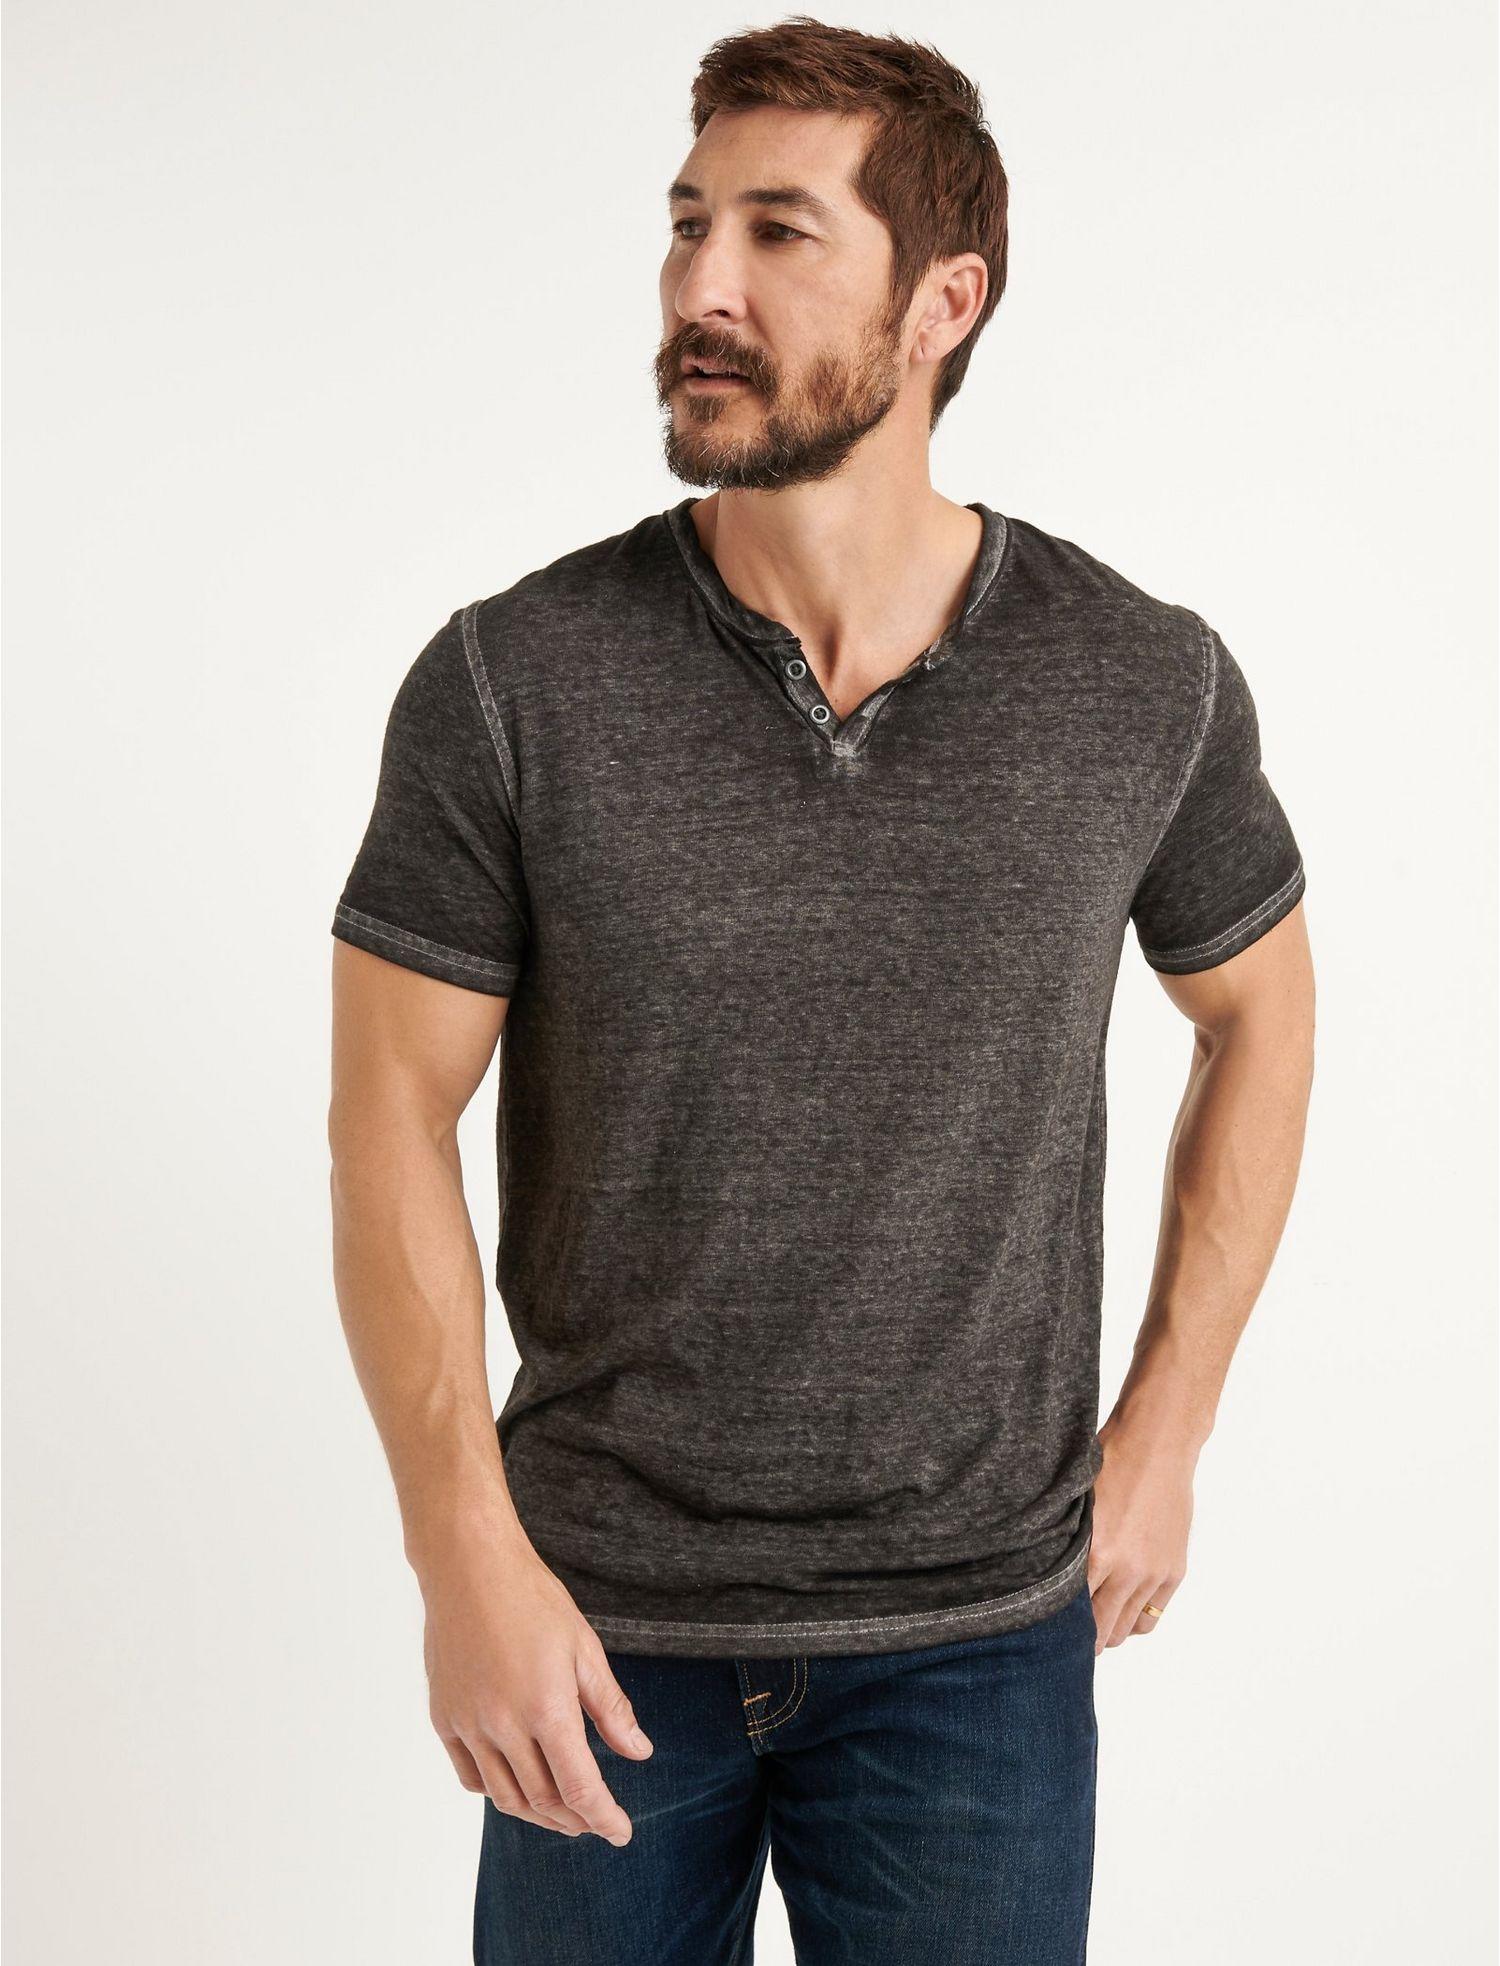 Lucky Brand Cotton Venice Burnout Notch Tee in Black for Men - Lyst